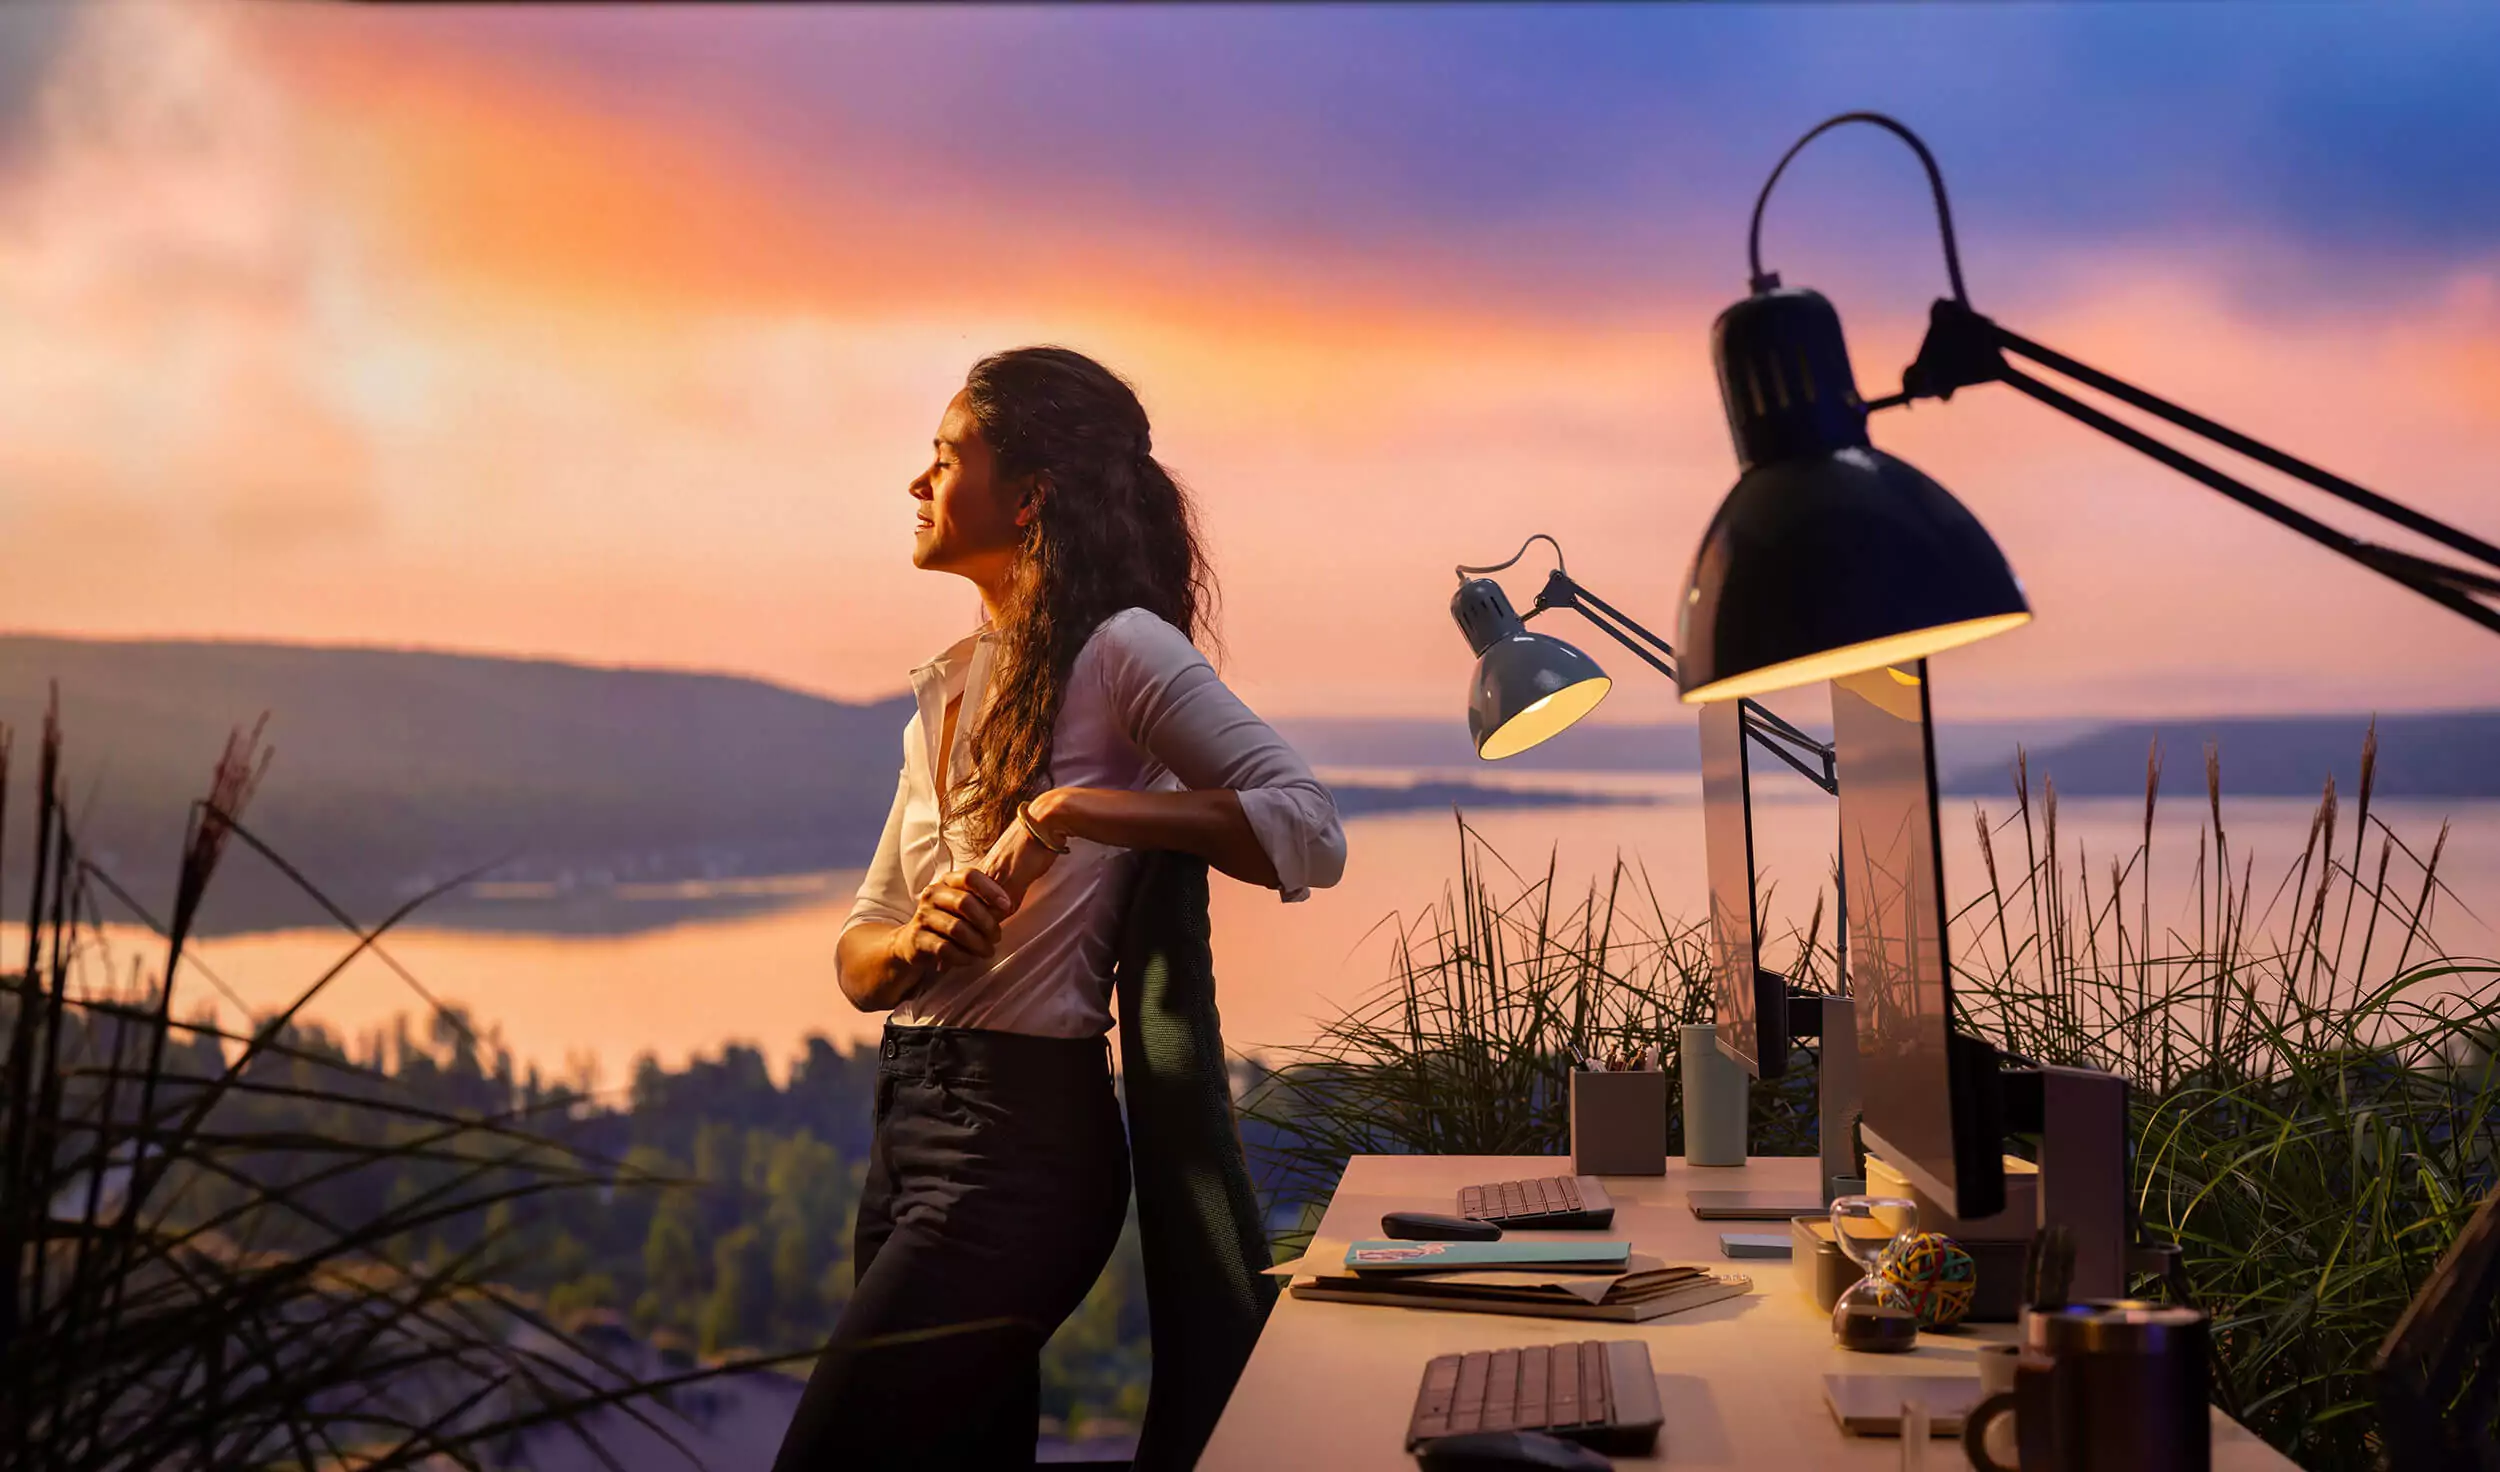 A woman in professional dress leans against an office chair in front of an organized desk with sunlight beaming on her face juxtaposed over a stunning lake scene at sunset.